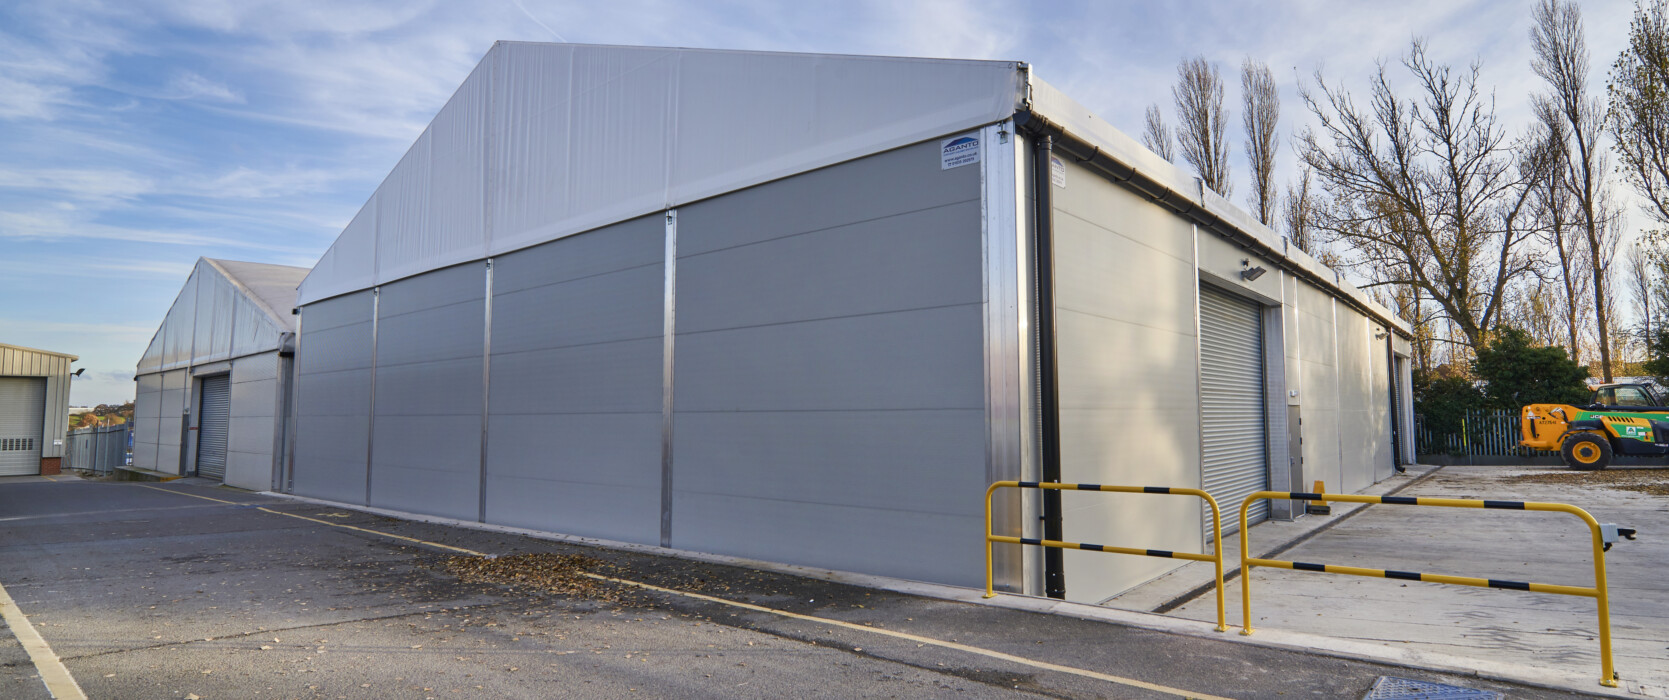 fully insulated temporary structure to accommodate warehouse storage and vehicle workshop